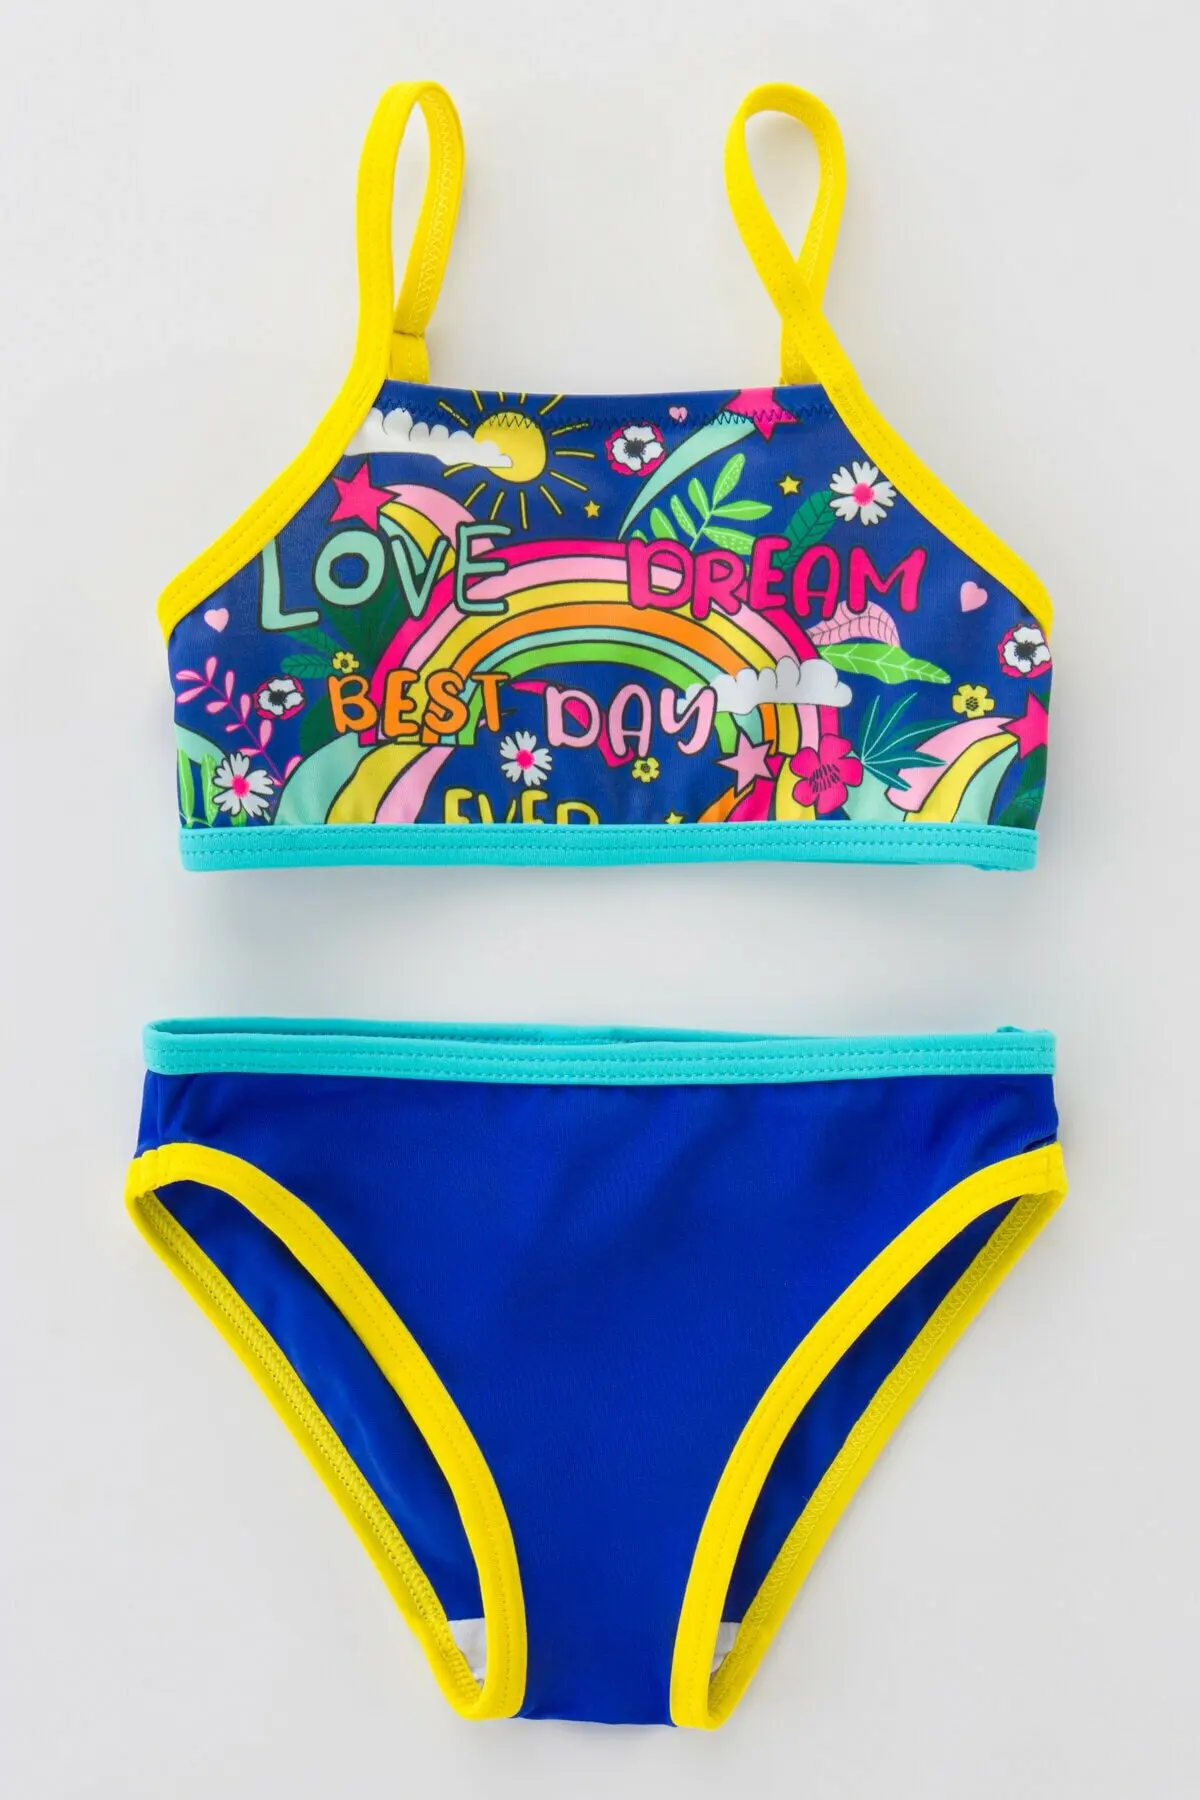 LOOK FOR YOUR WONDERFUL NIGHTS WITH ITS STUNNING Girl Blue Patterned Bikini Set FREE  SHIPPING